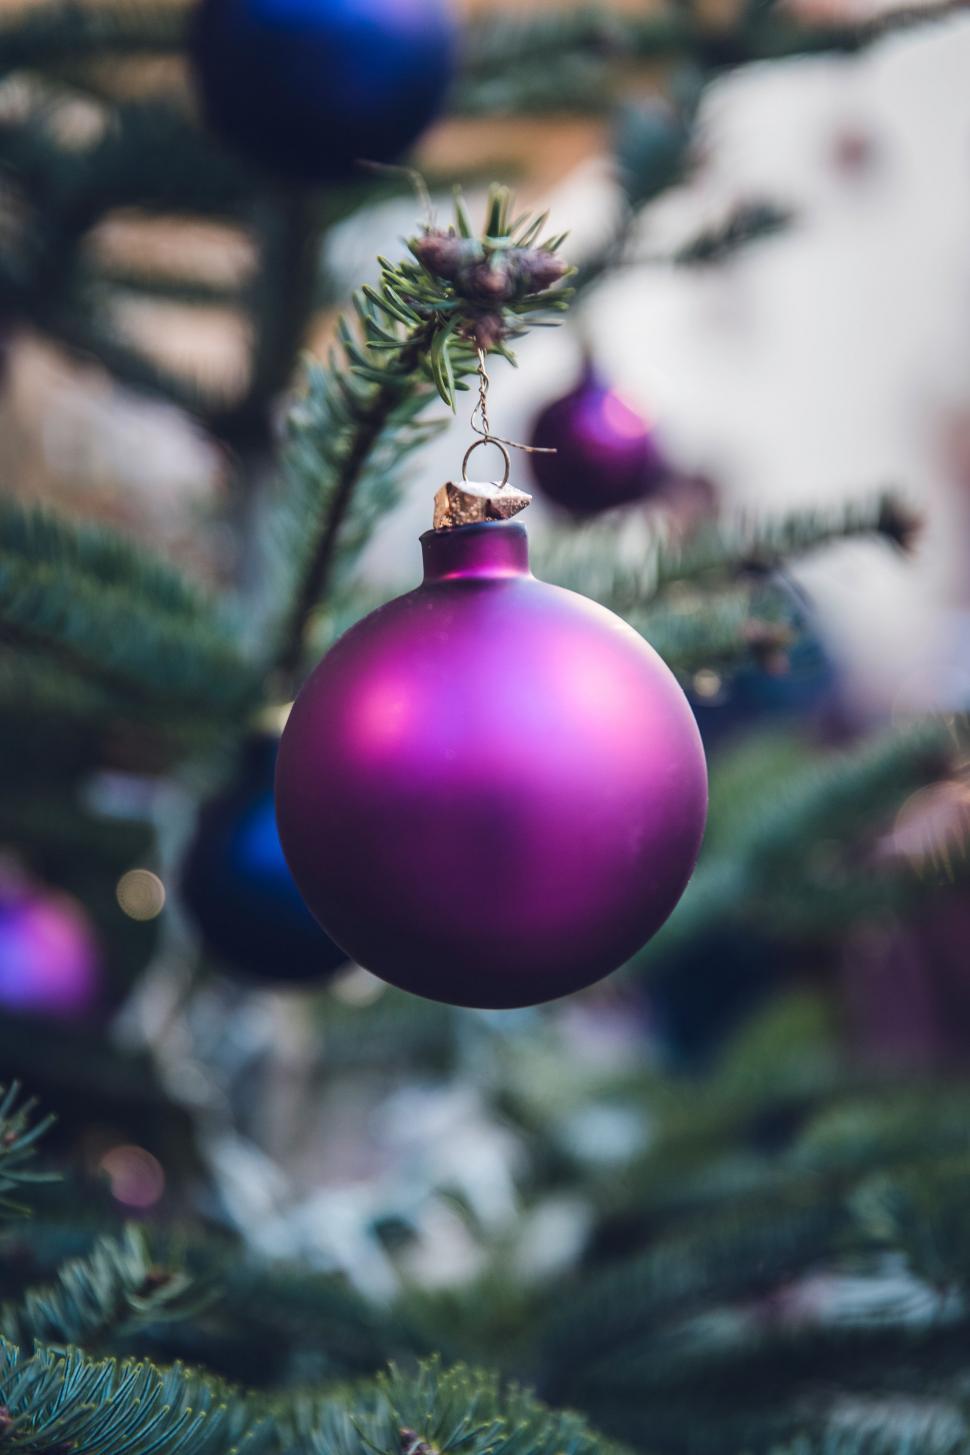 Free Image of Purple Ornament Hanging From Christmas Tree 